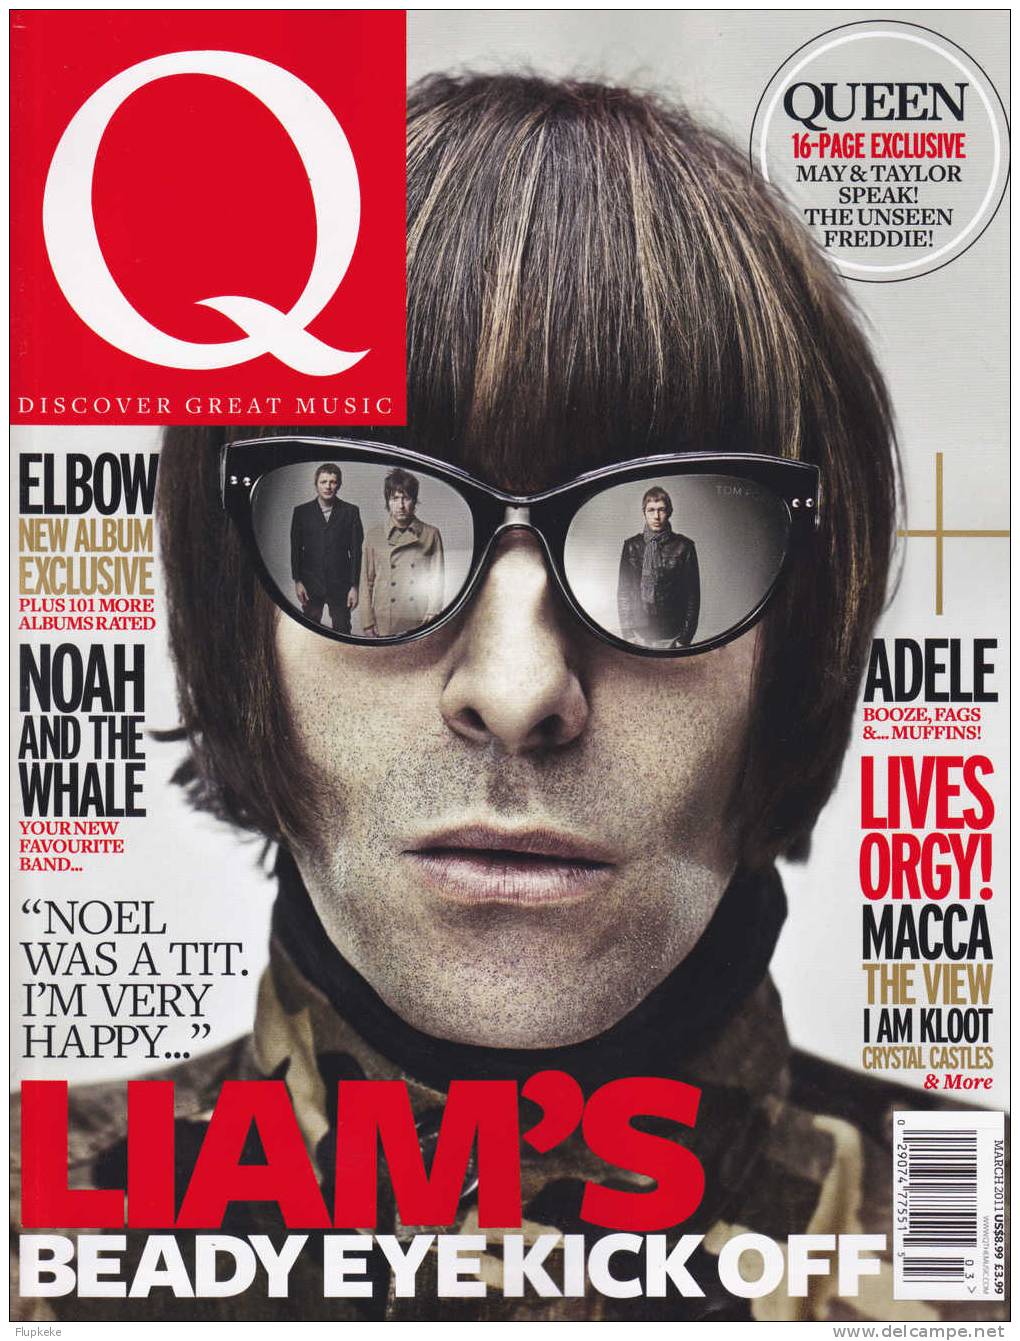 Q 296 March 2011 Liam´s Beady Eye Kick Off Queen 16 Page Exclusive - Divertimento